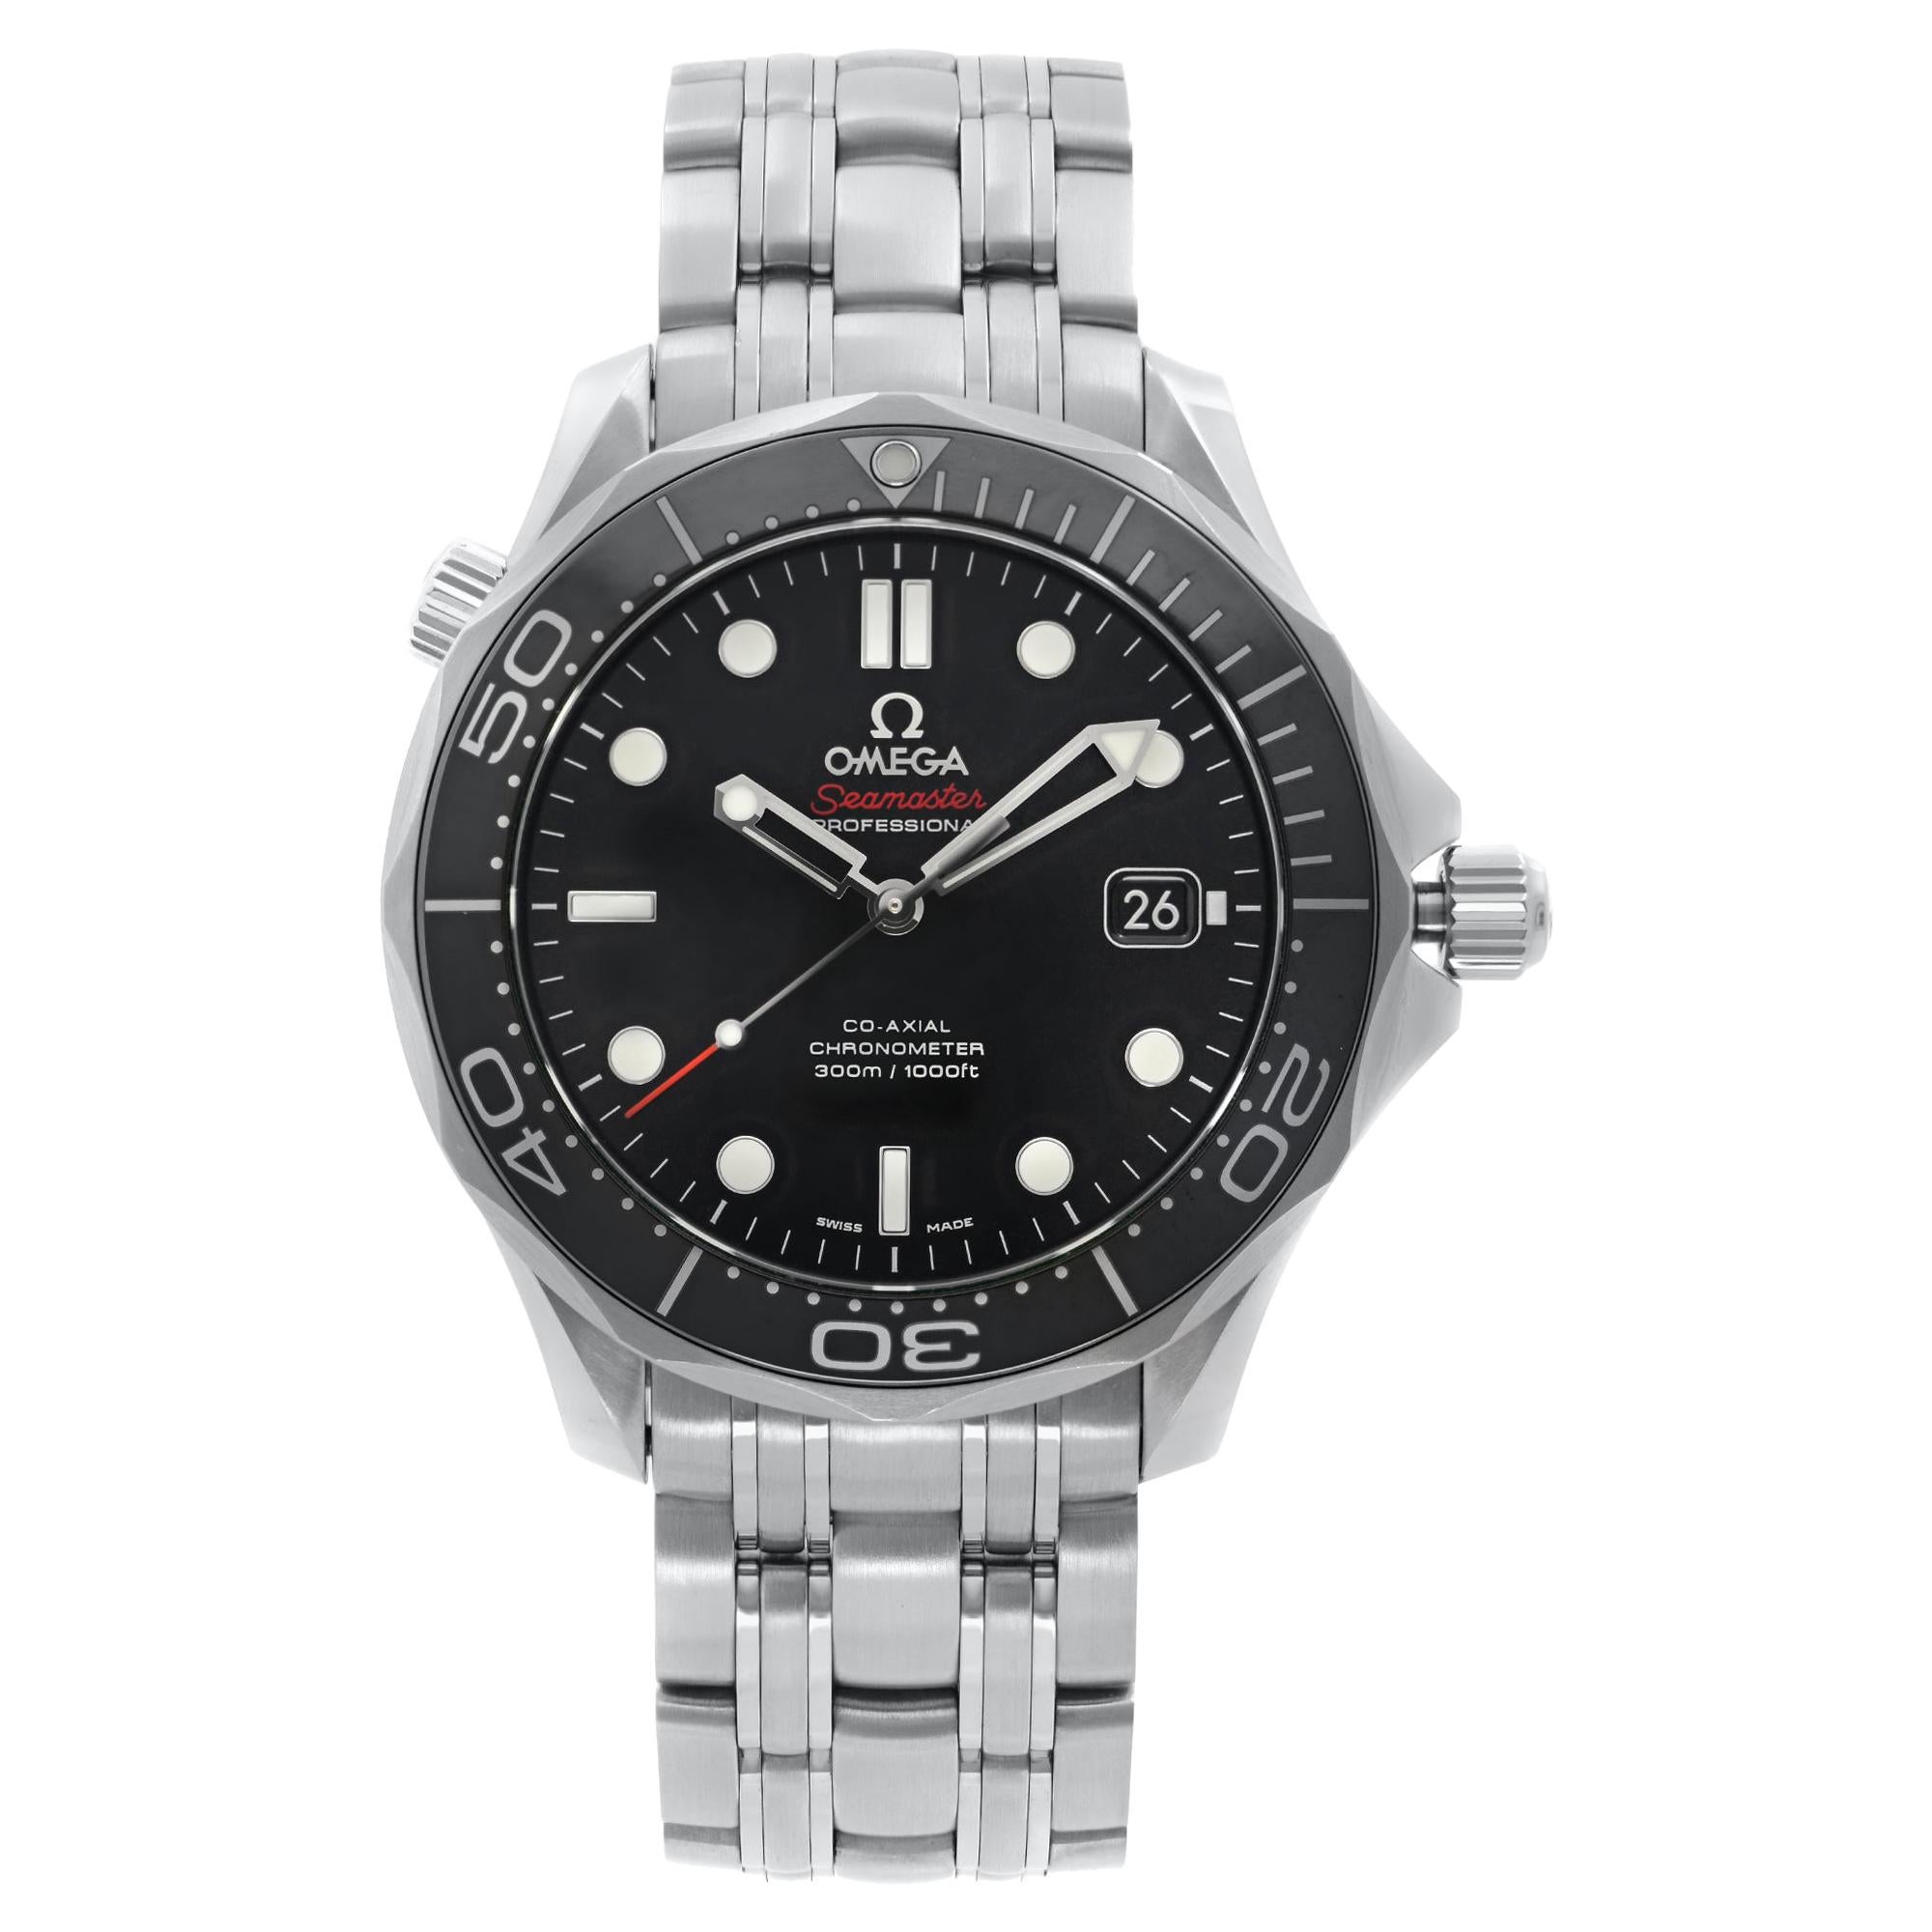 Omega Seamaster Diver Steel Black Dial Automatic Watch 212.30.41.20.01.003